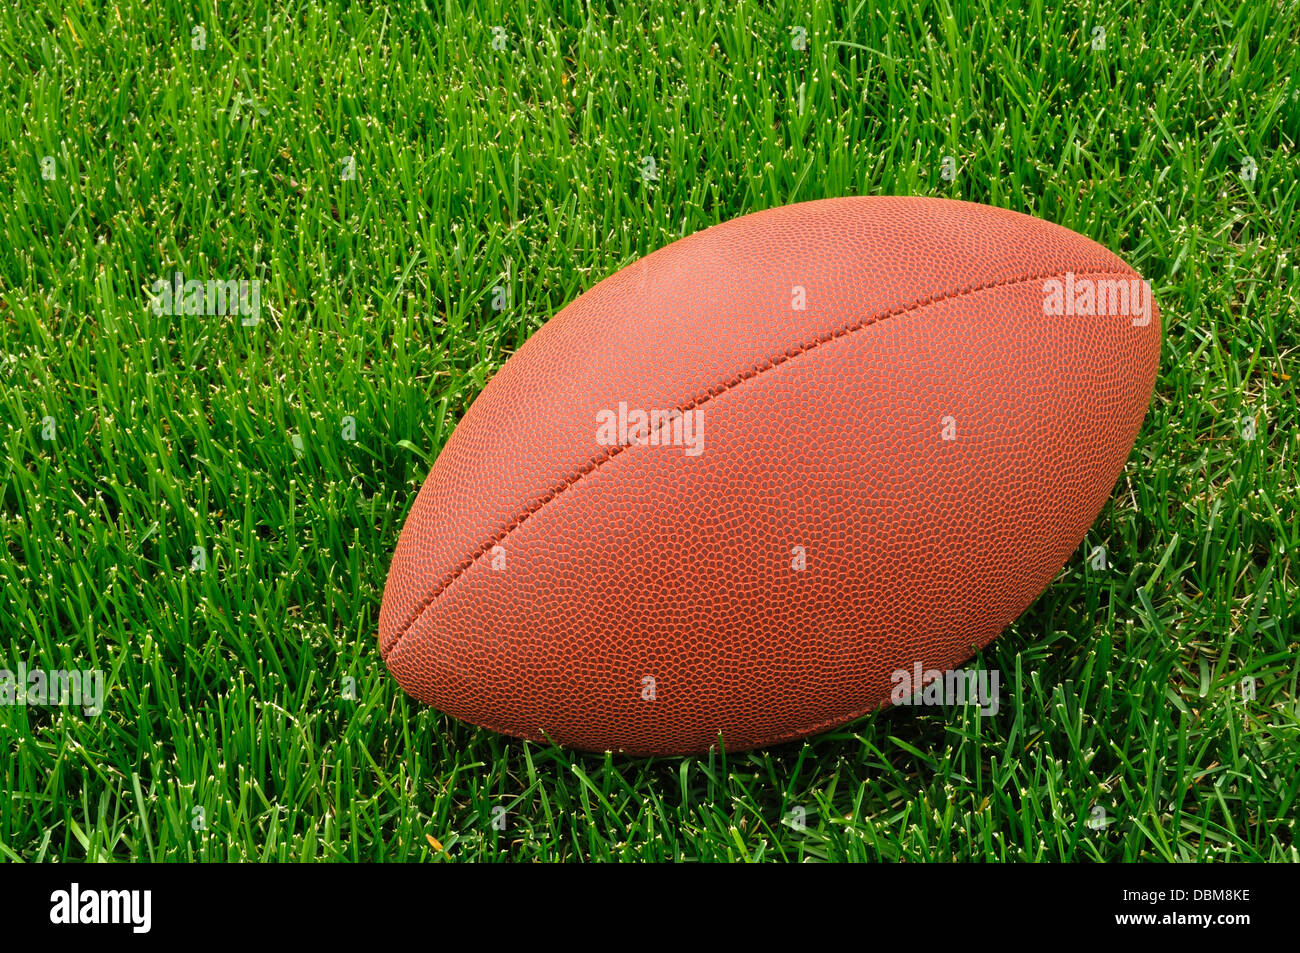 American football on a grass playing field Stock Photo